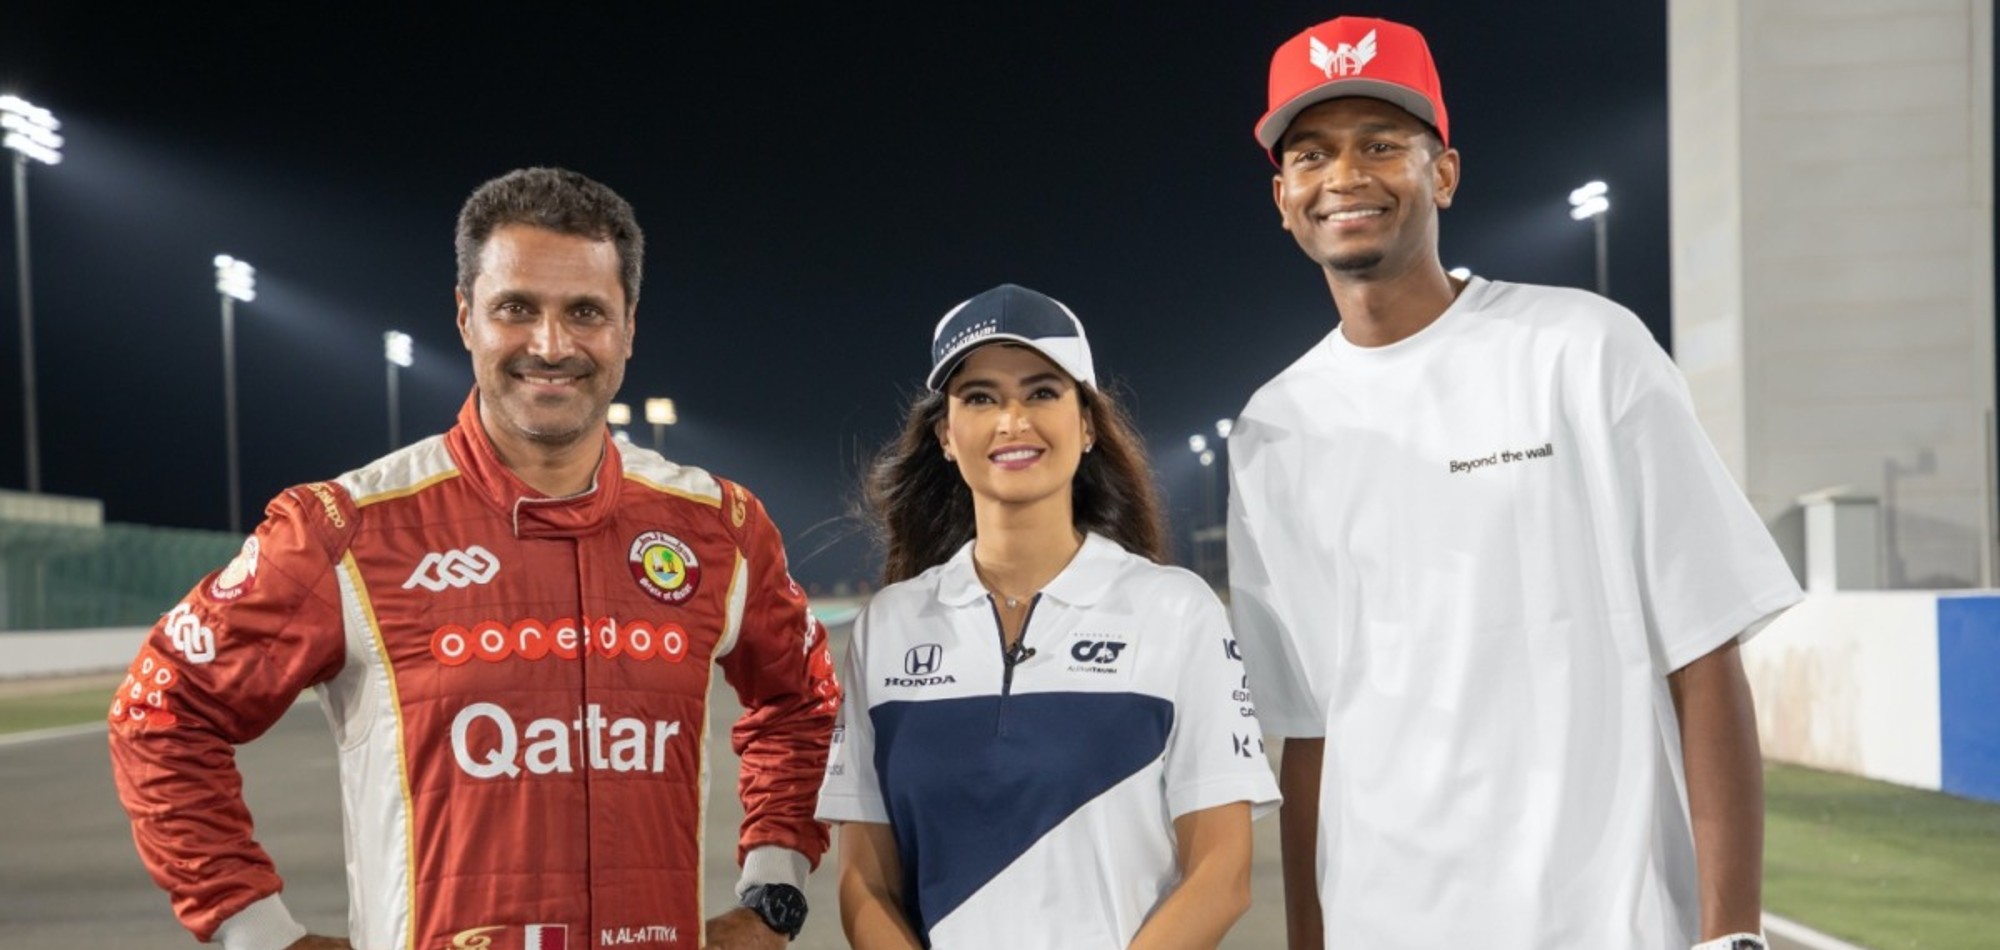 QMMF launches "Losail Star Power" campaign for F1 weekend